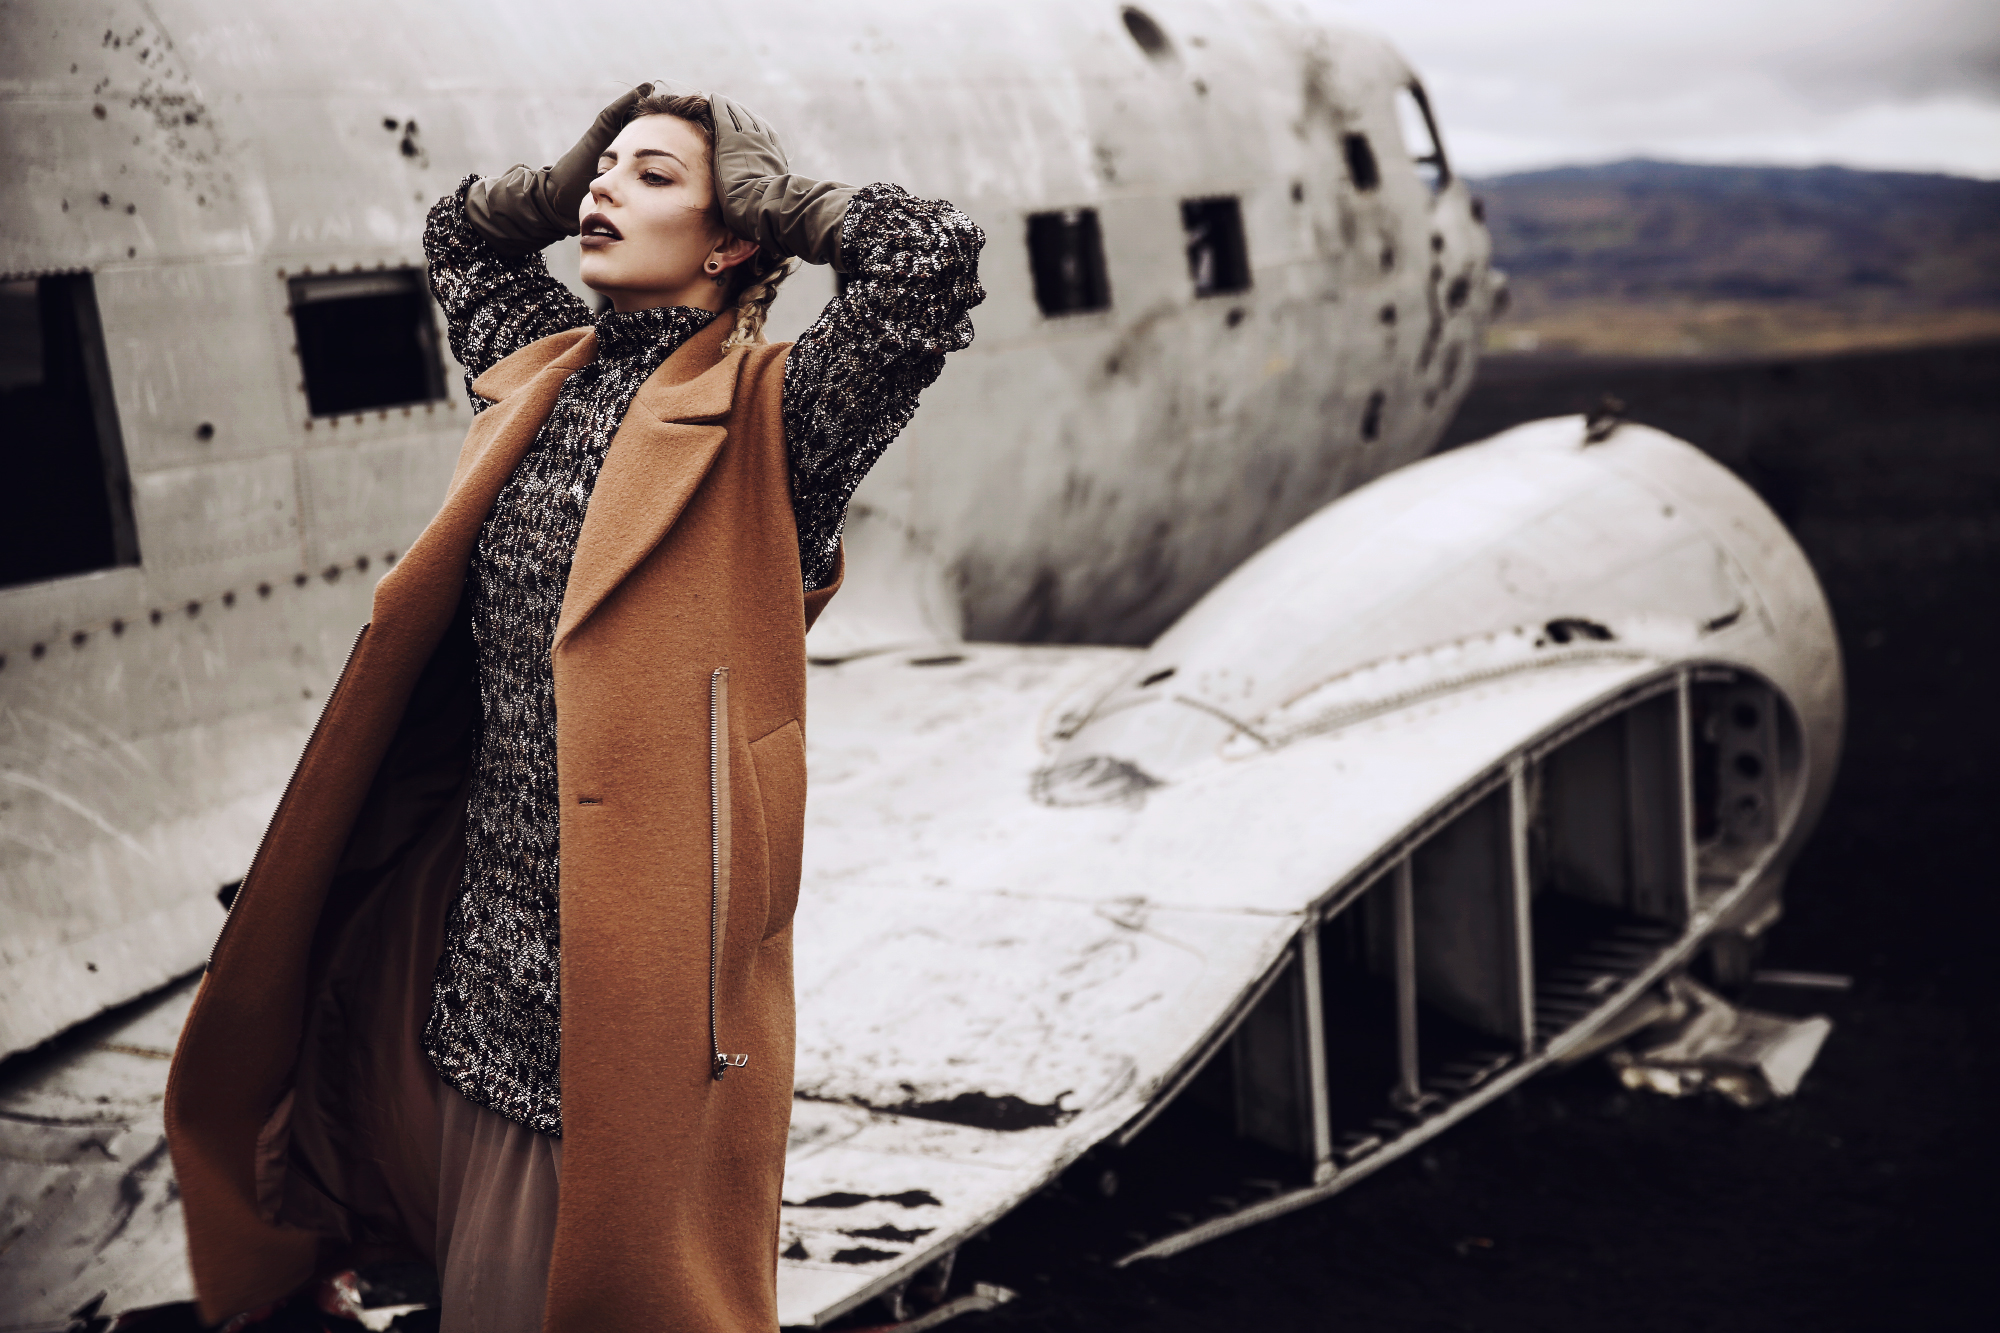 fashion editorial shoot in Iceland | plane crash | short story | style: glamorous, party, sequins, winter